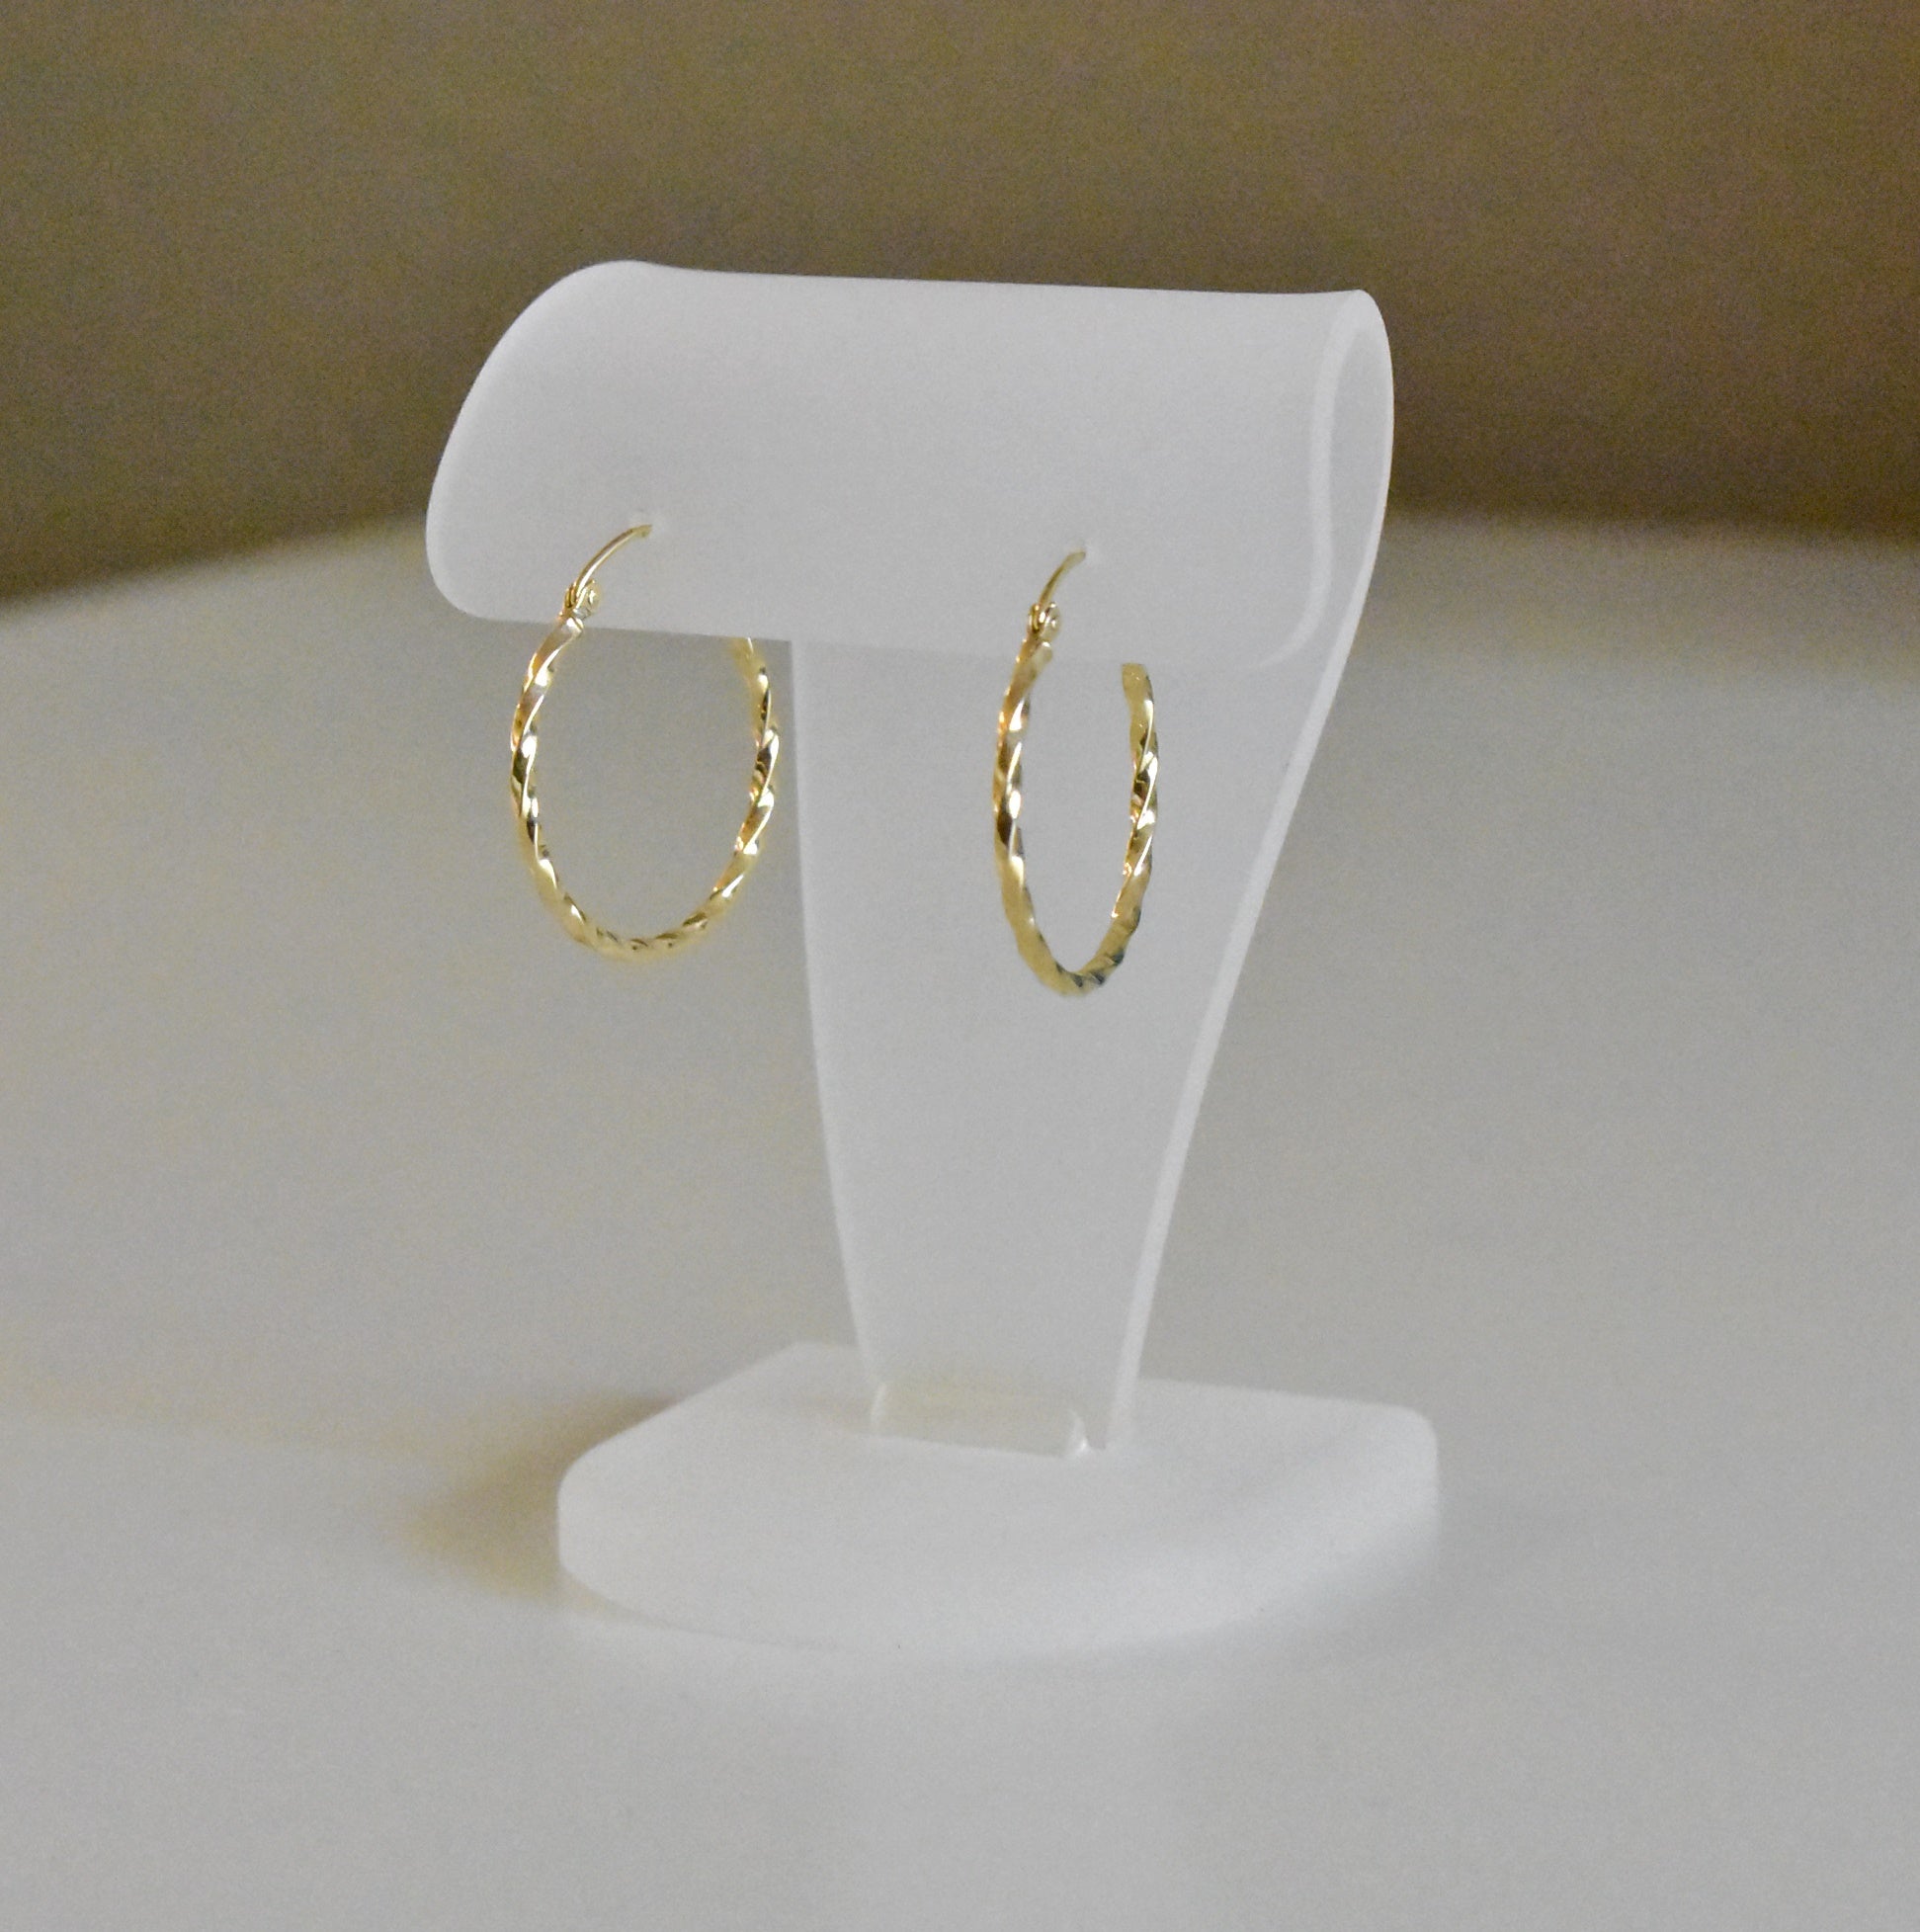 14K Yellow Gold Twisted Modern Classic Round Hoop Earrings 25mm x 2mm